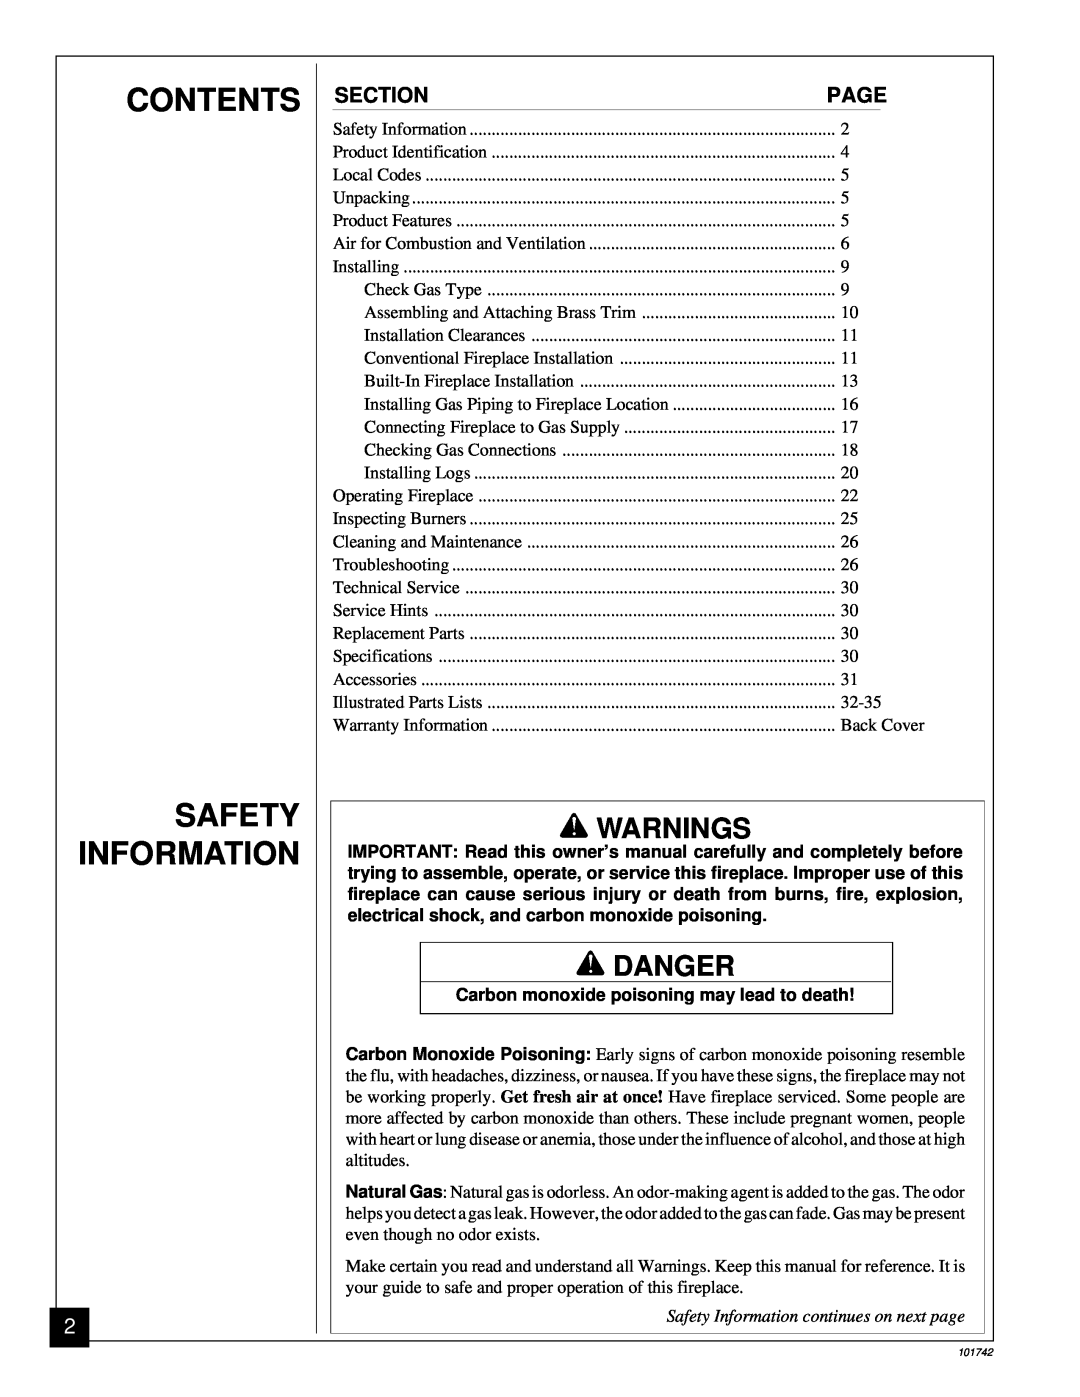 Desa UNVENTED (VENT-FREE) NATURAL GAS FIREPLACE installation manual Contents Safety Information, Warnings, Danger 